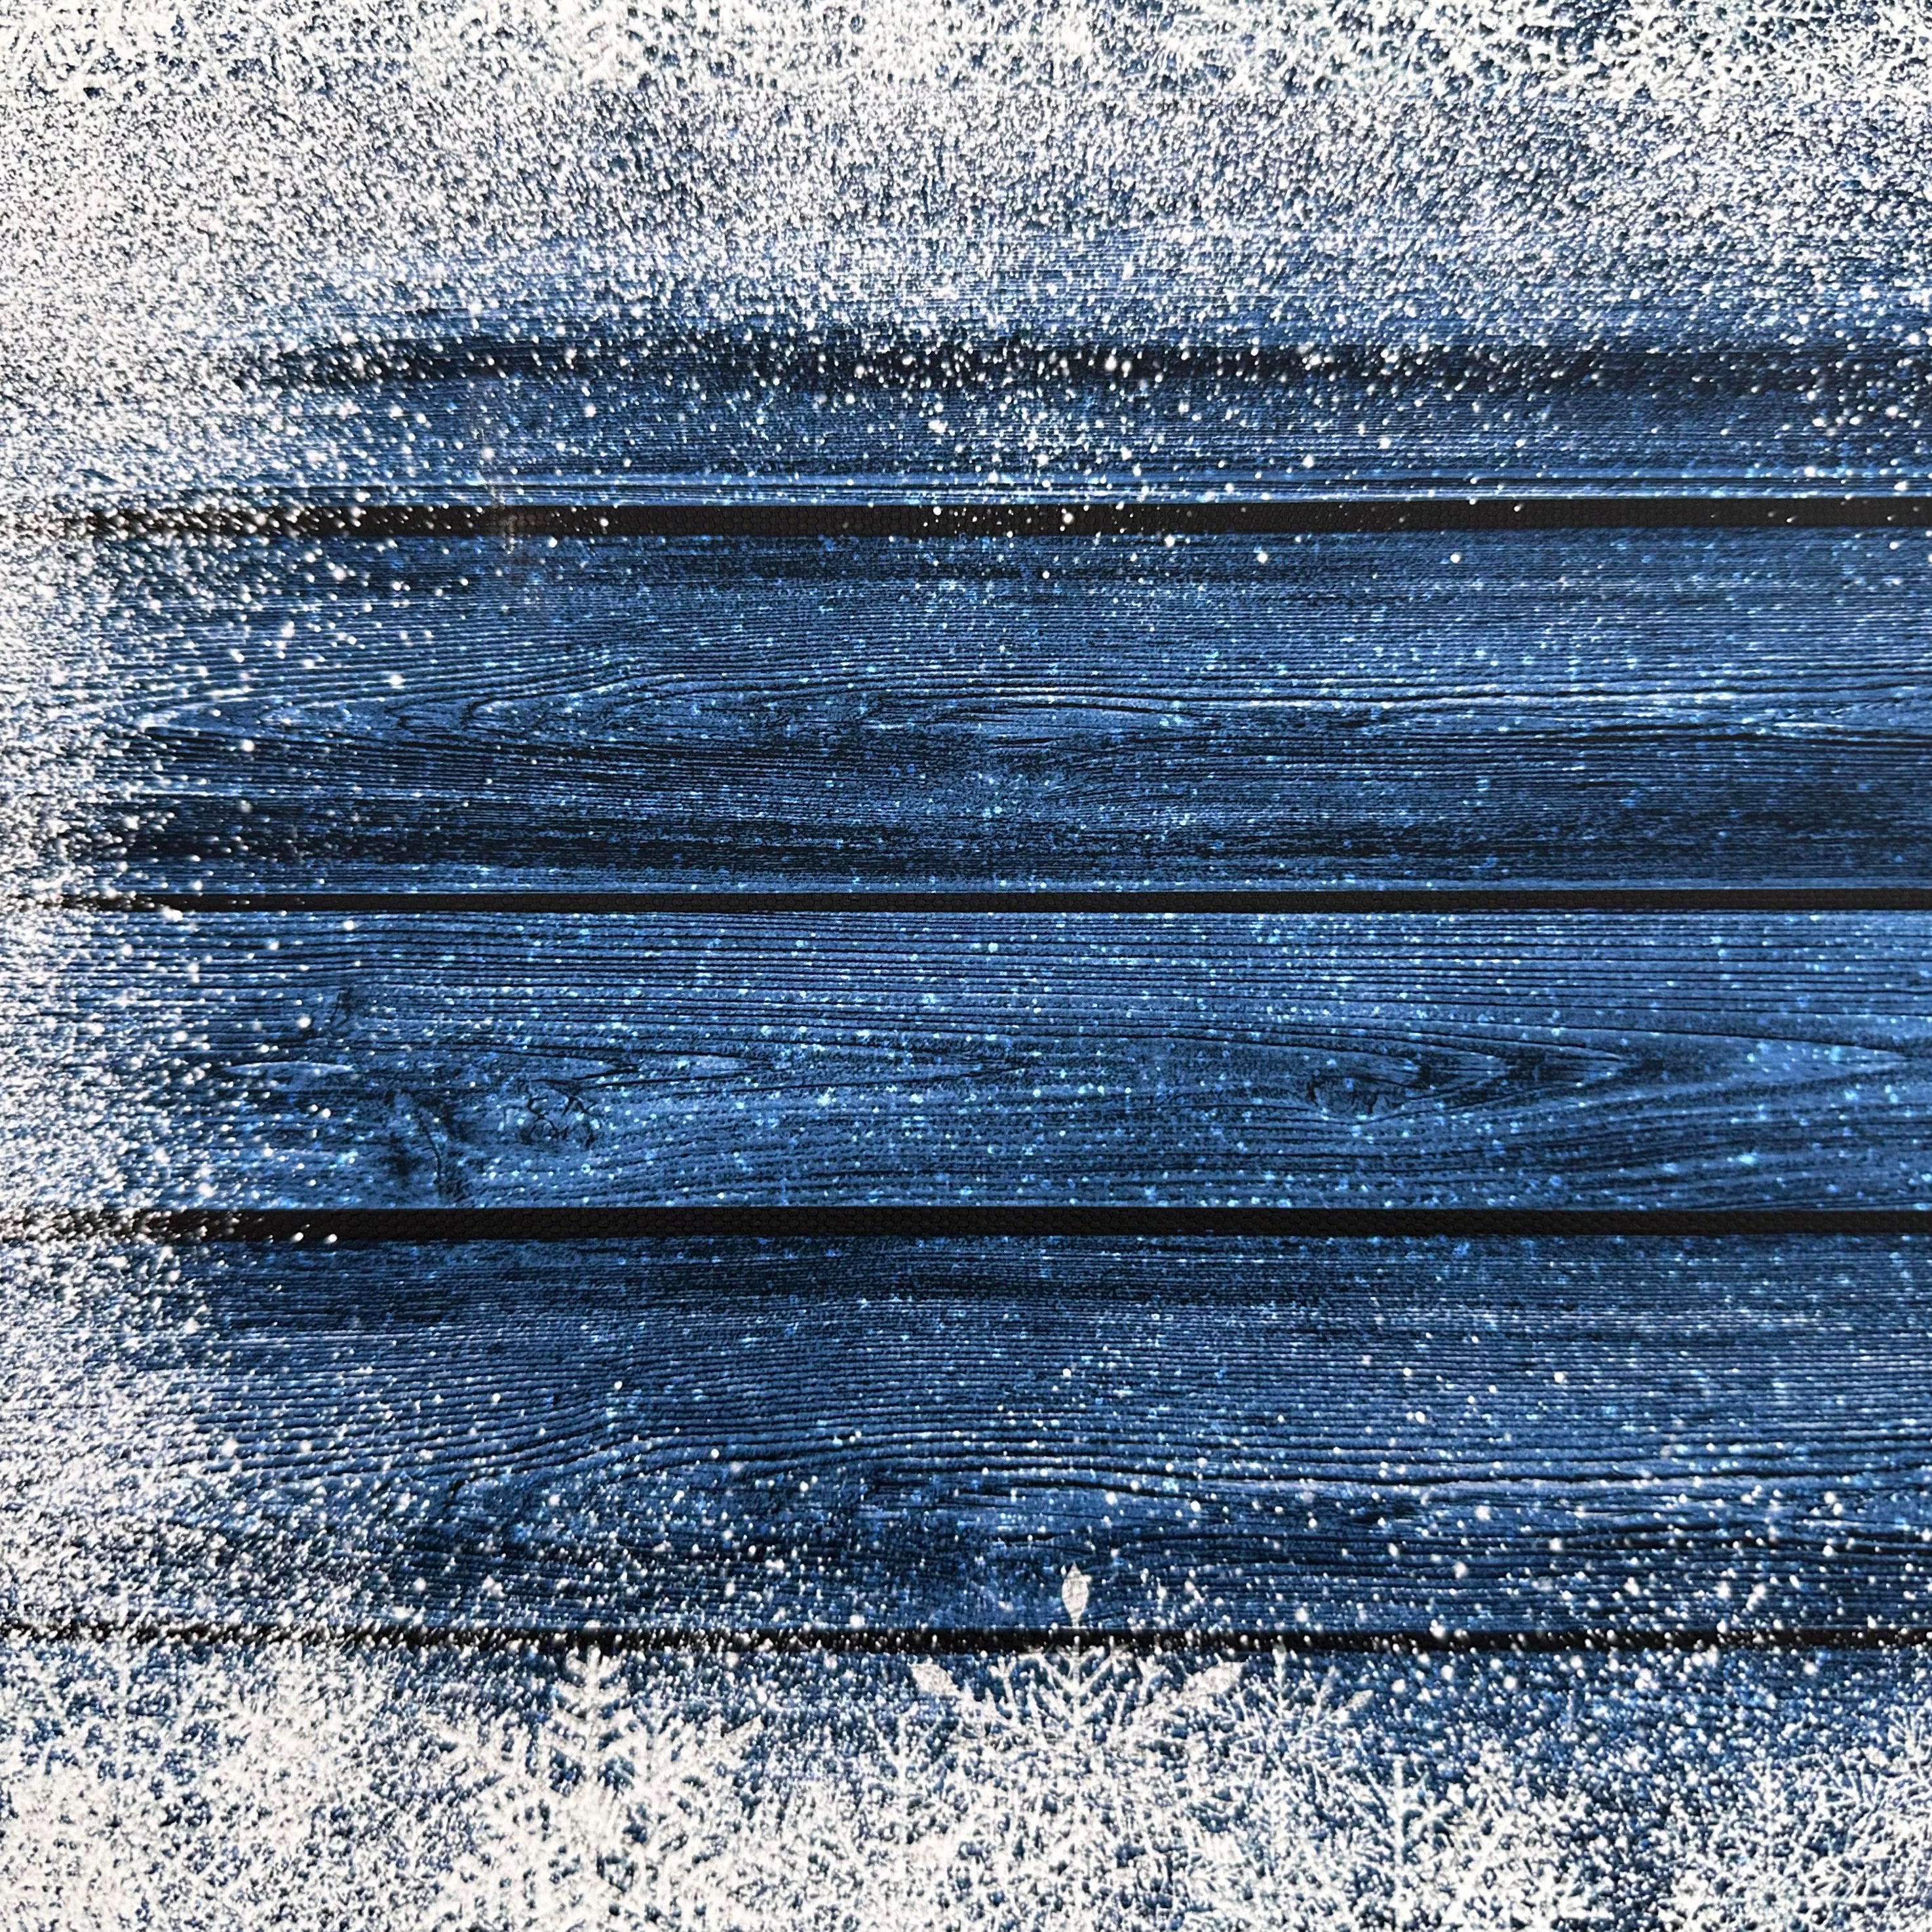 Snowy Blue Wooden effect Canvas Photography Background